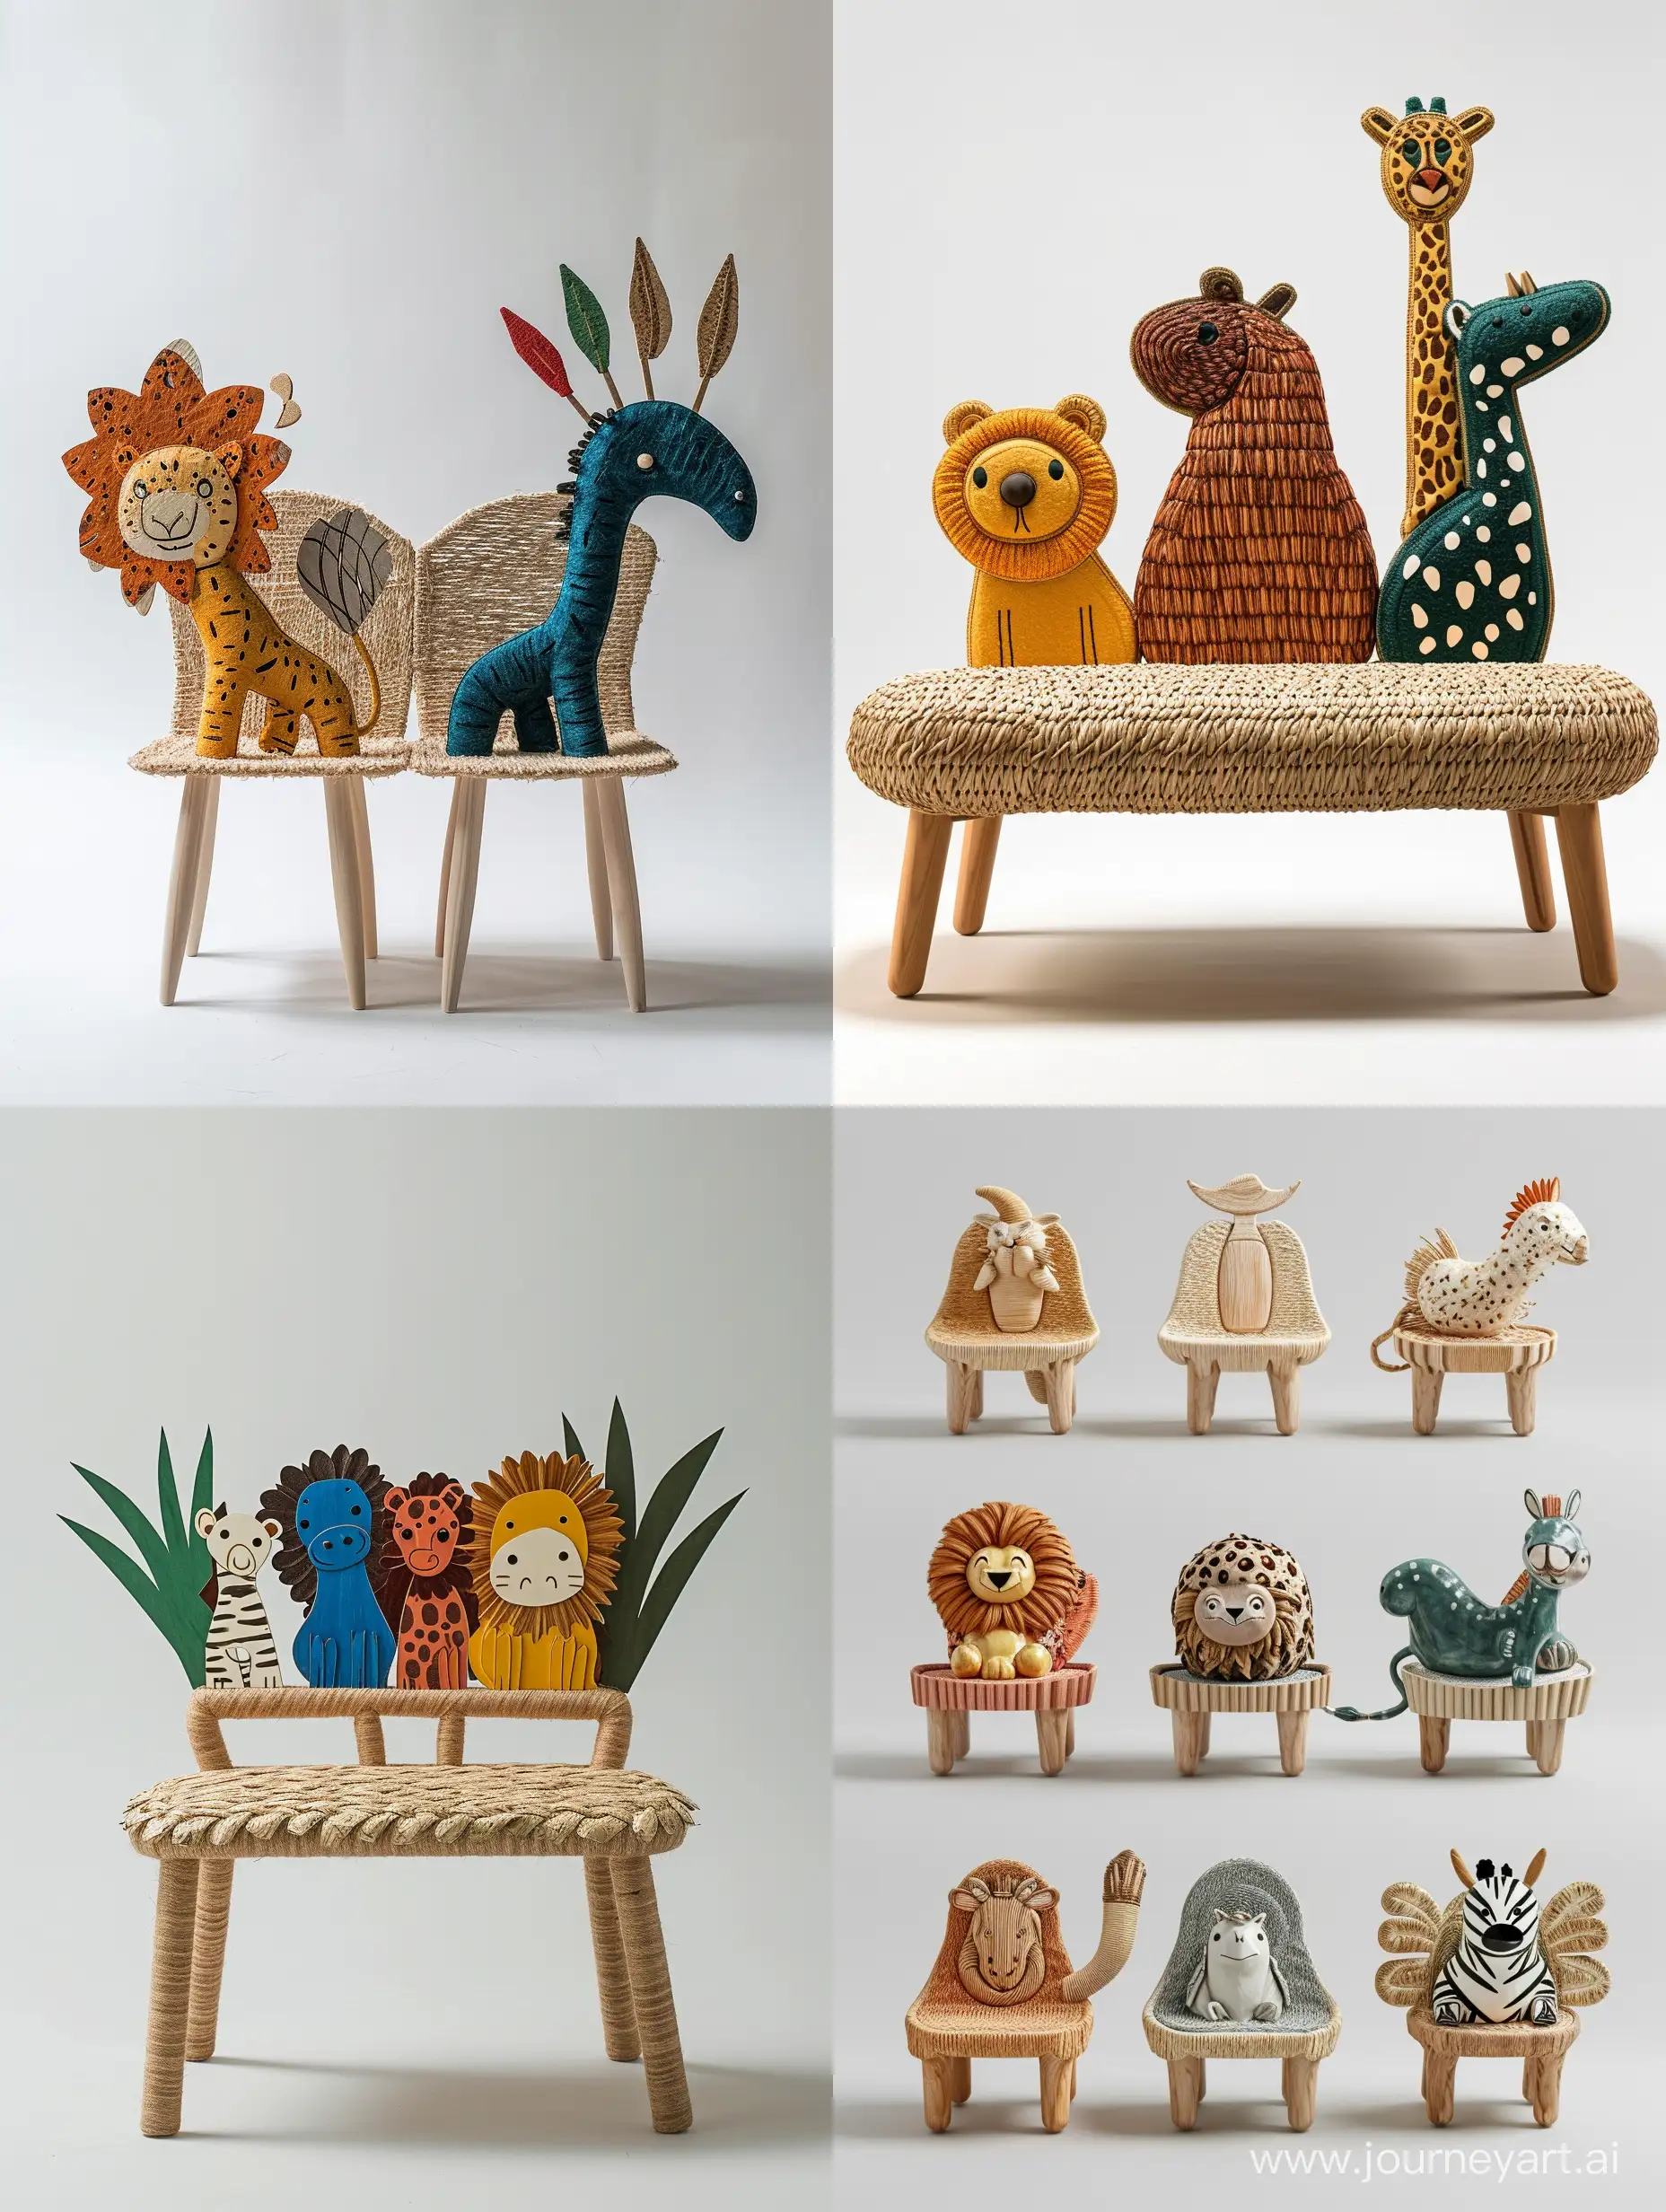 imagine an image of a minimal sturdy children’s big chair inspired by Children's drawing of cute safari animals like cute lion or zebra or griffin or cheetah or hippocampus , with backrests shaped like different creatures. Use recycled wood for the frame and woven plant fibers for seating areas, depicted in colors representative of the chosen animals. The seat should stand approximately 30cm tall, built to educate about wildlife and ensure durability.unreal ,realistic style